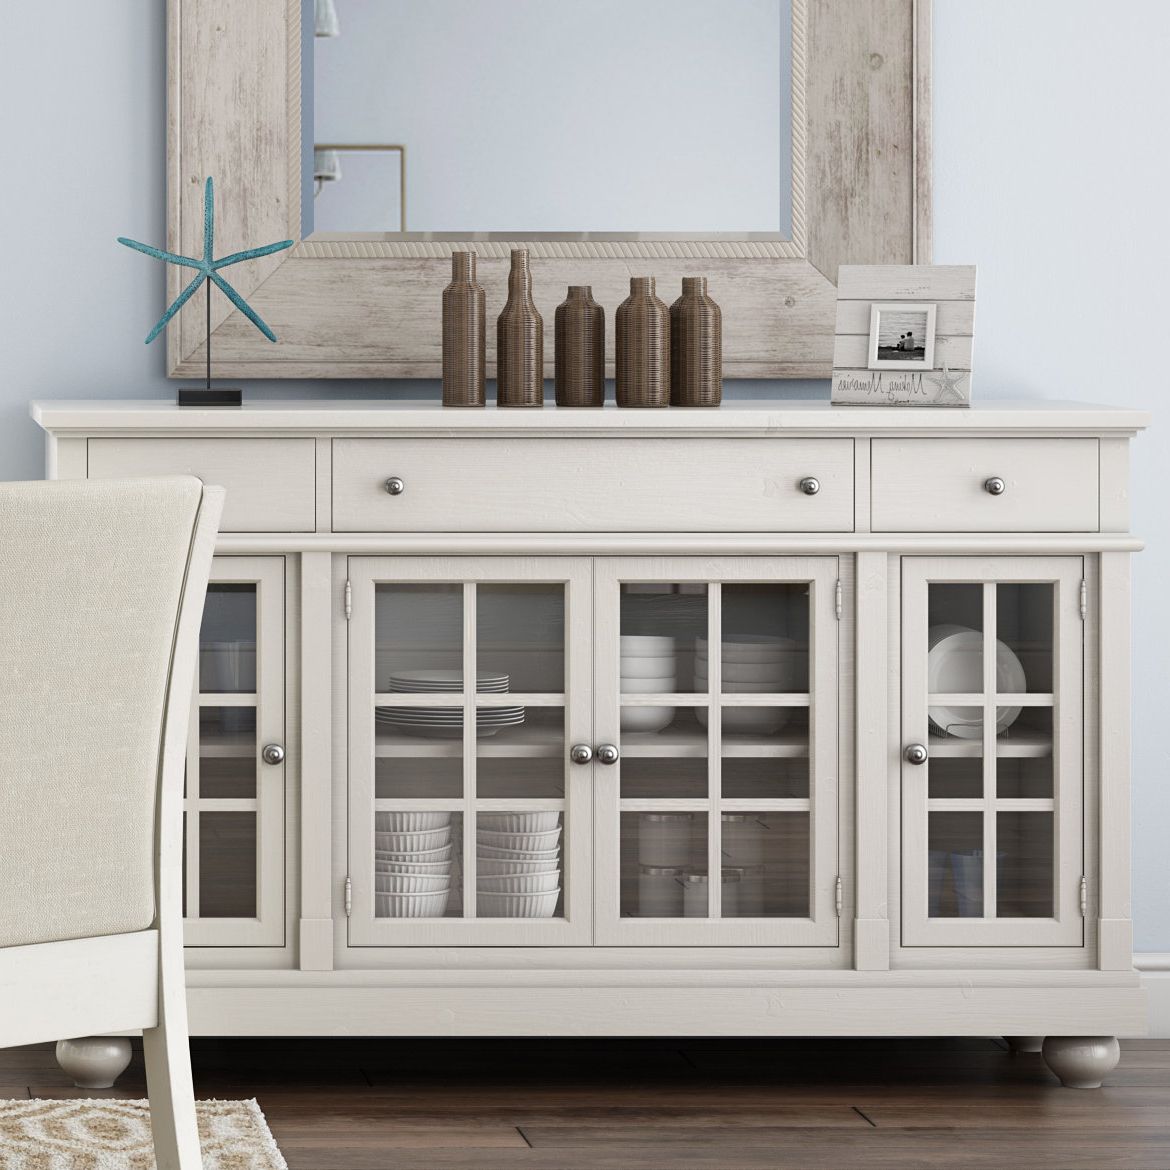 Farmhouse & Rustic Sideboards & Buffets | Birch Lane Intended For Chicoree Charlena Sideboards (View 6 of 20)